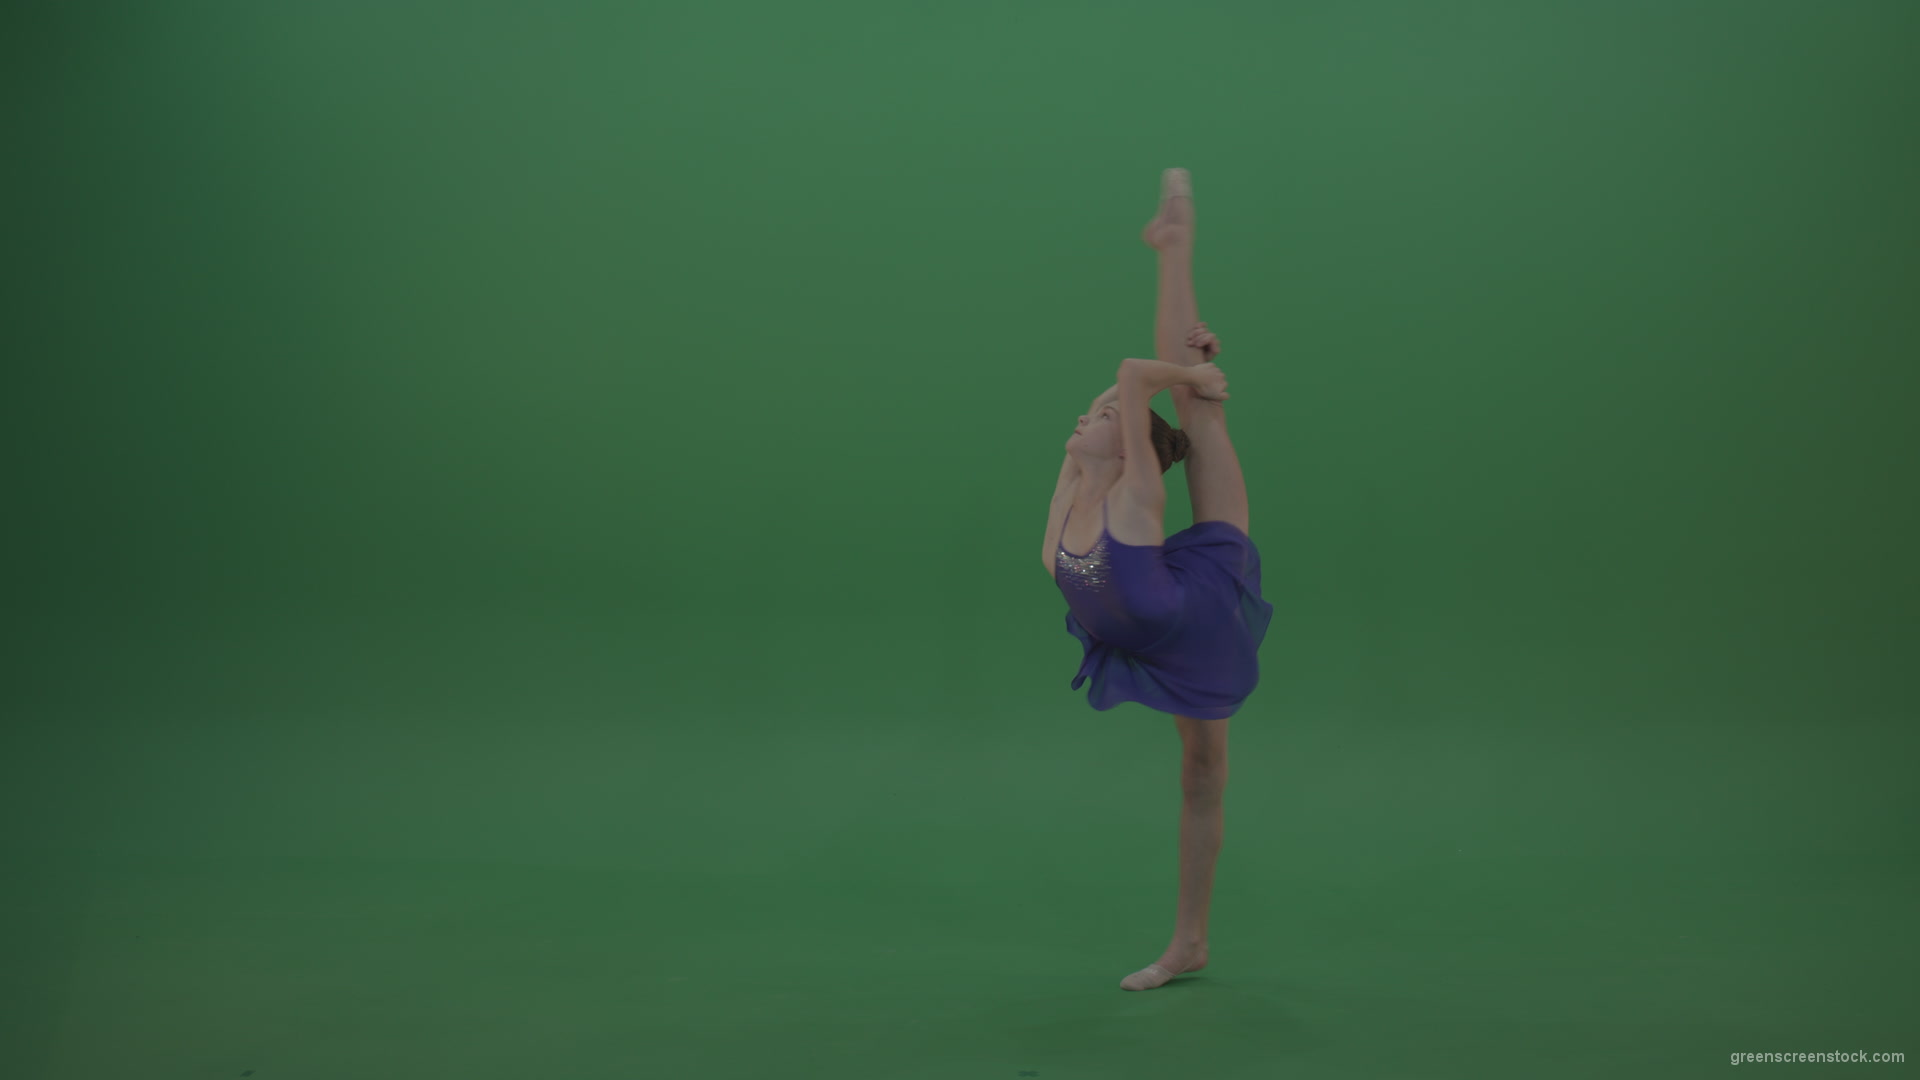 Young_Gymnast_Female_Wearing_Blue_Show_Costume_Performing_Great_Spinning_Arabesque_Moves_Showing_Awesome_Technique_On_Green_Screen_Wall_Background_005 Green Screen Stock